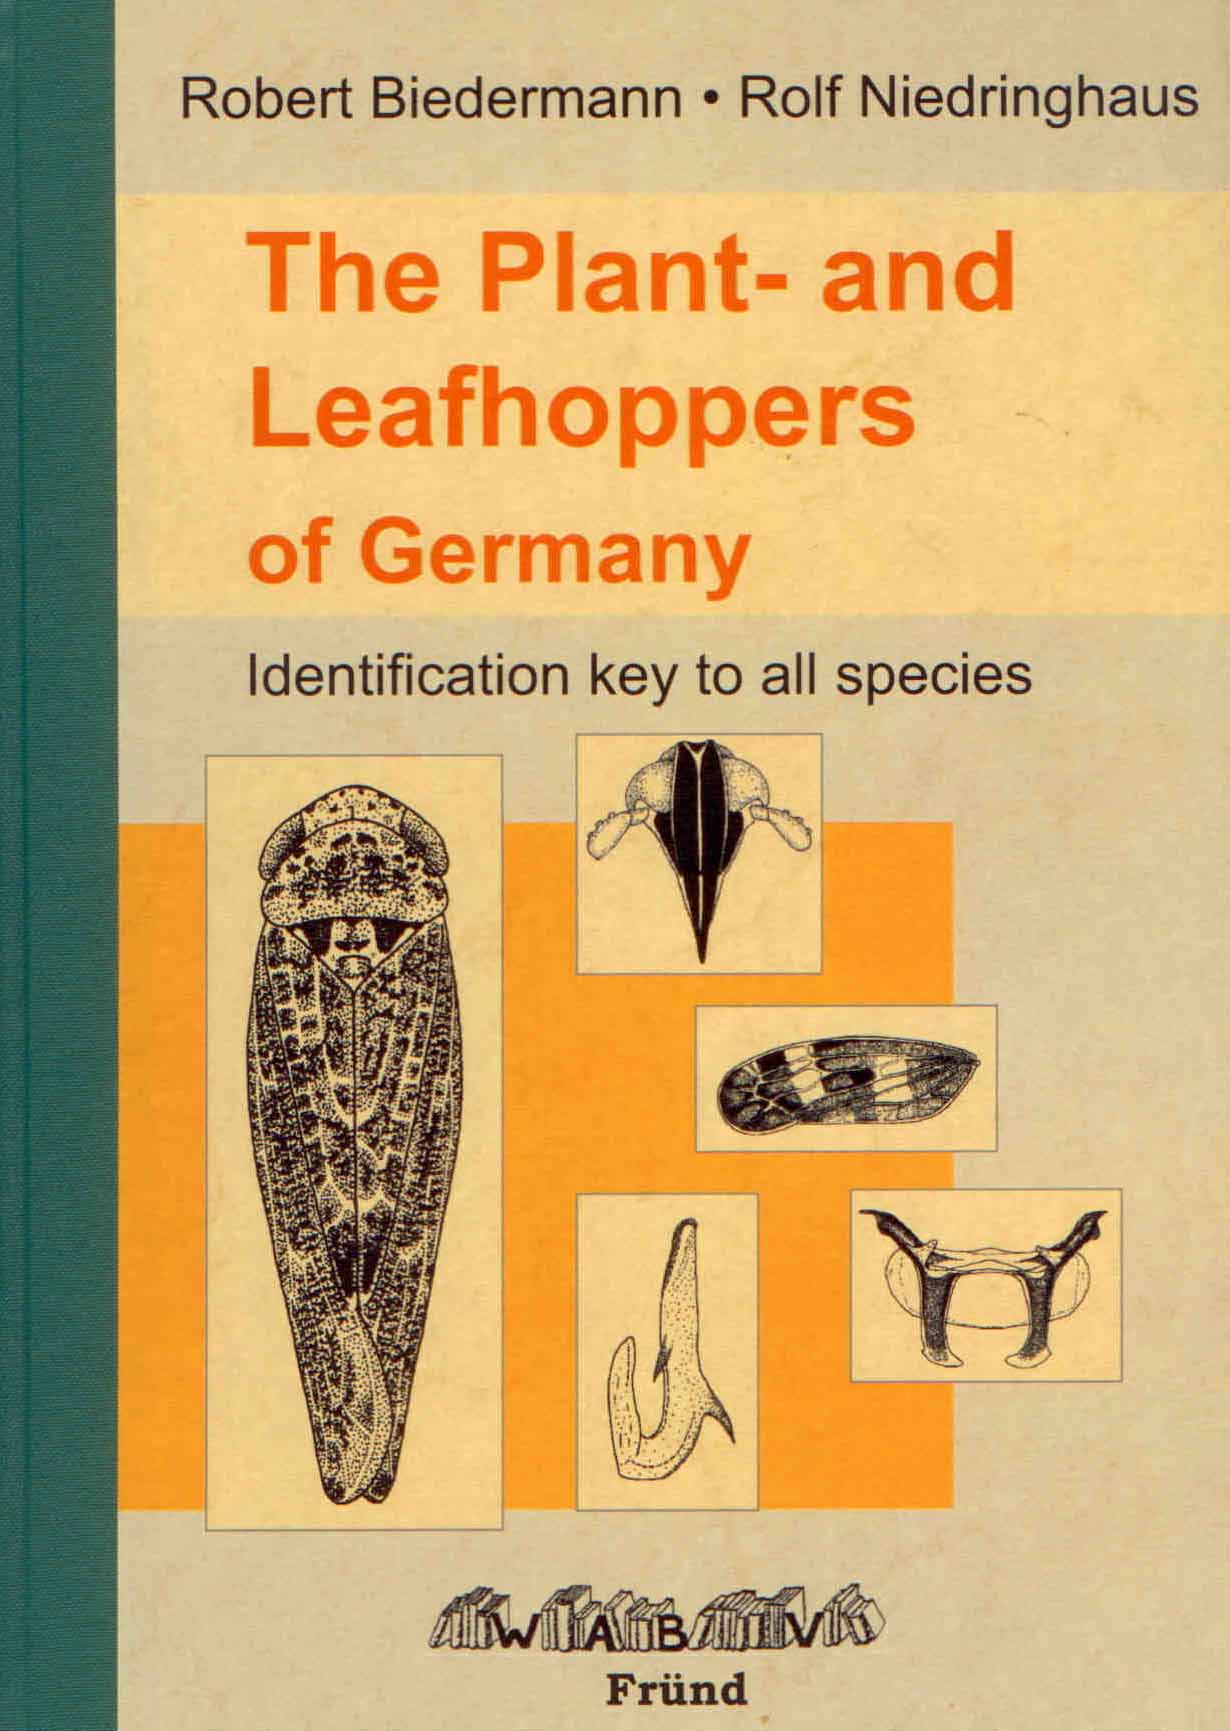 The Plant- and Leafhoppers of Germany: Identification Keys for all species - Biedermann, R.; Niedringhaus, R.